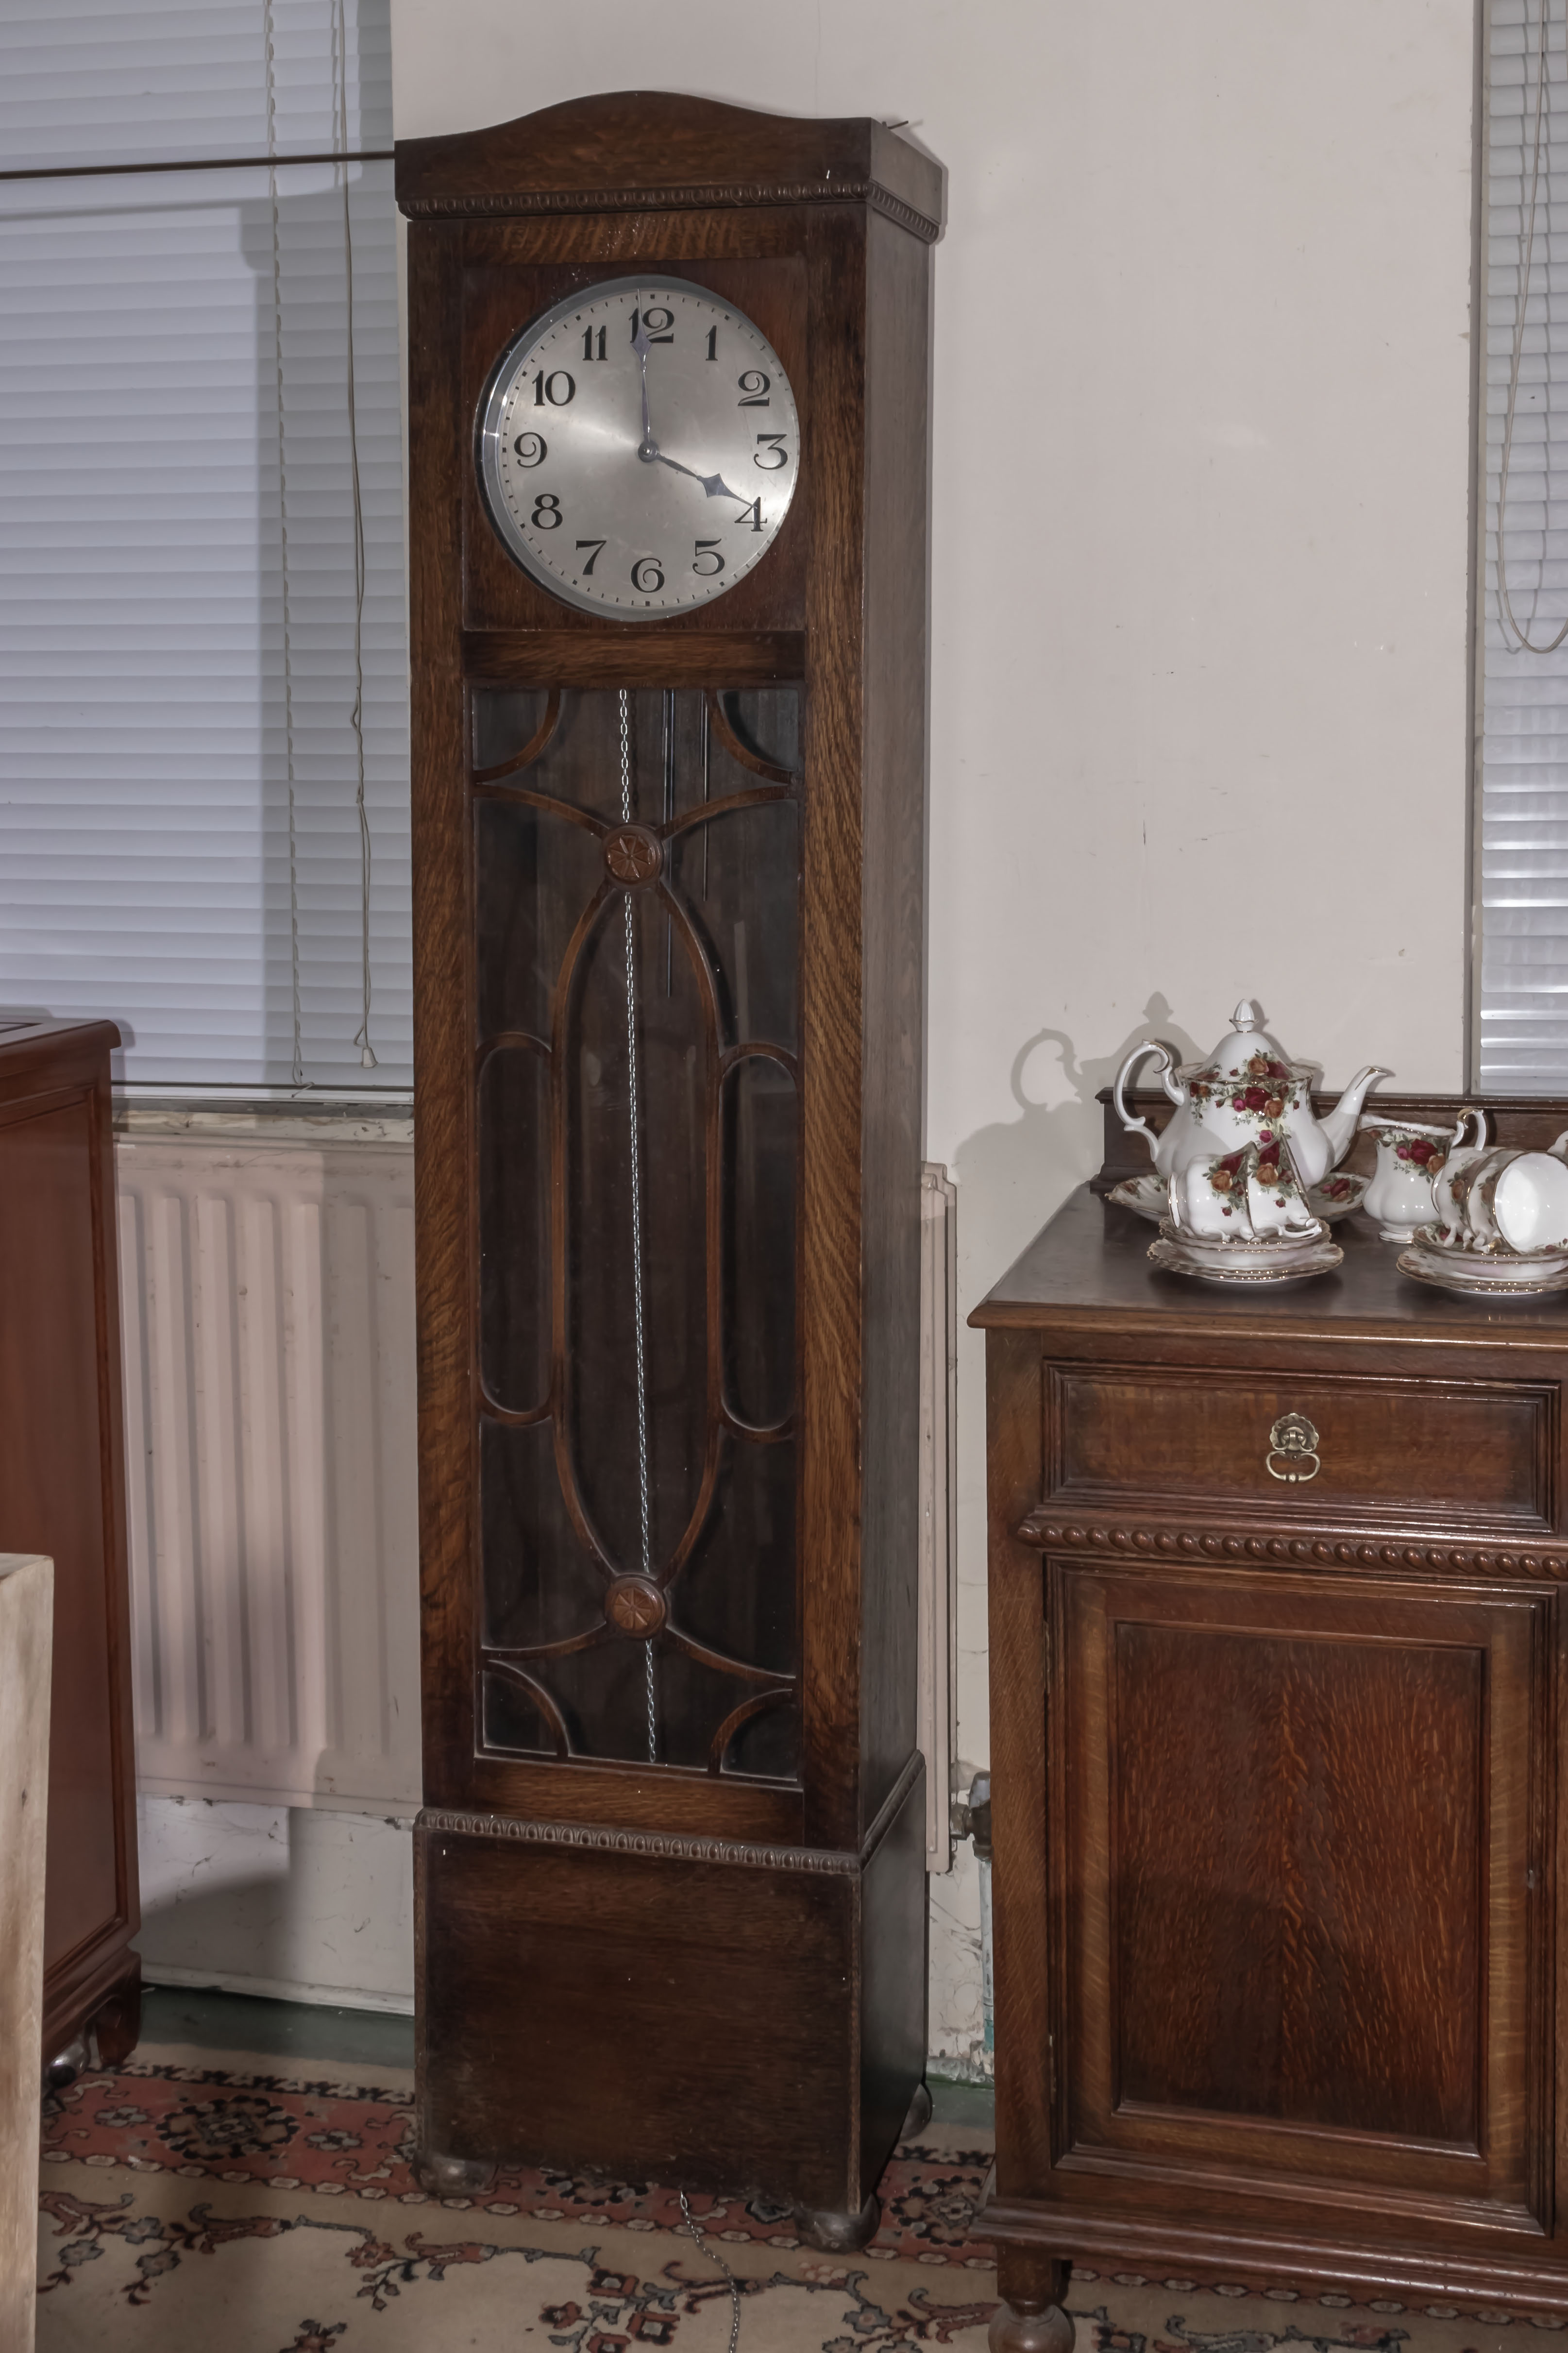 An Art Deco grandfather clock with 3 weights.